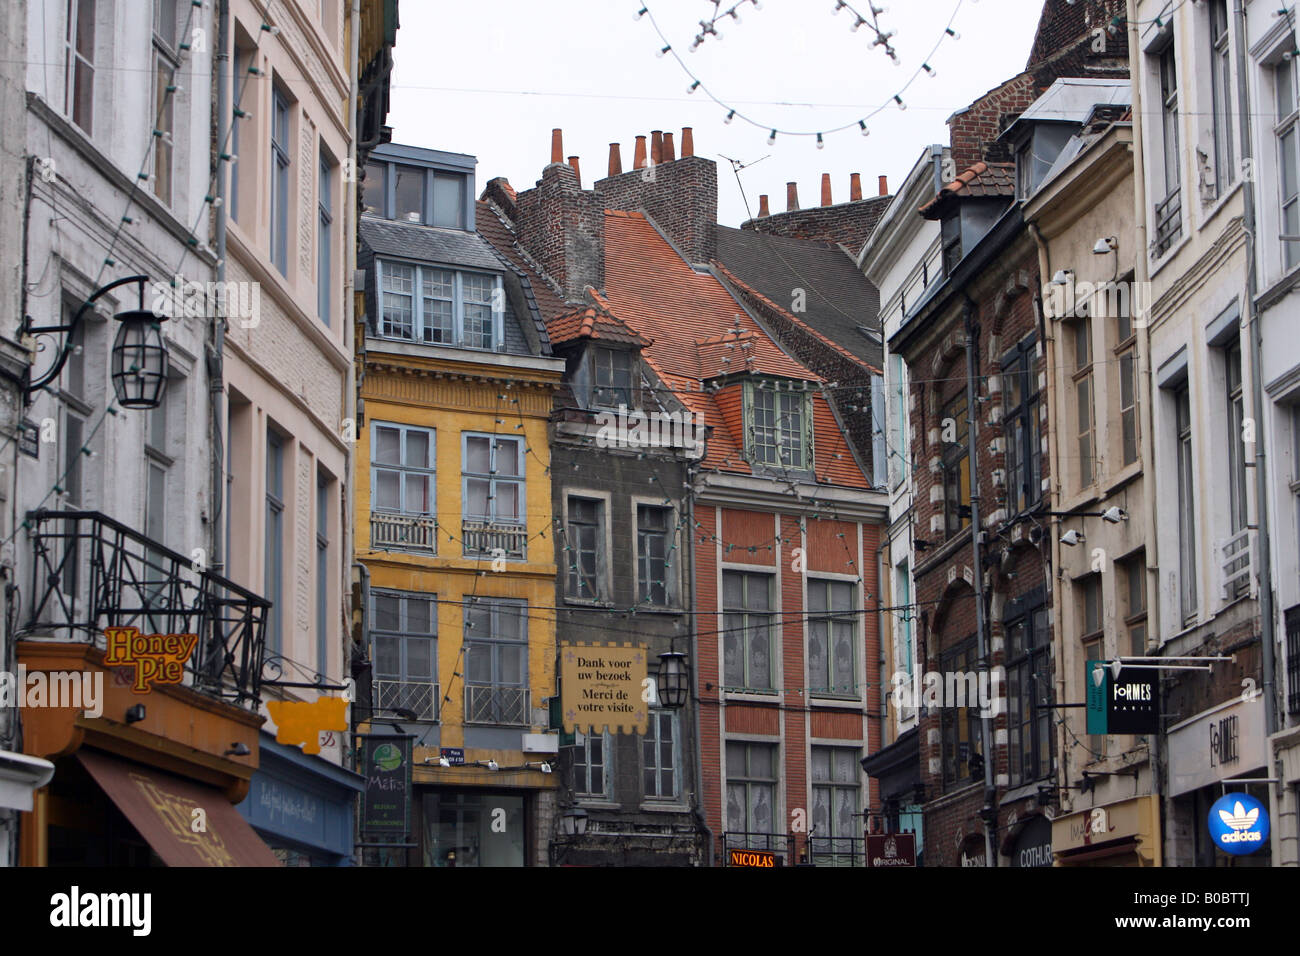 Pic By Paul Grover in the City of Lille France Pic Shows Streets of the old  town of Lille Pic Paul Grover Stock Photo - Alamy